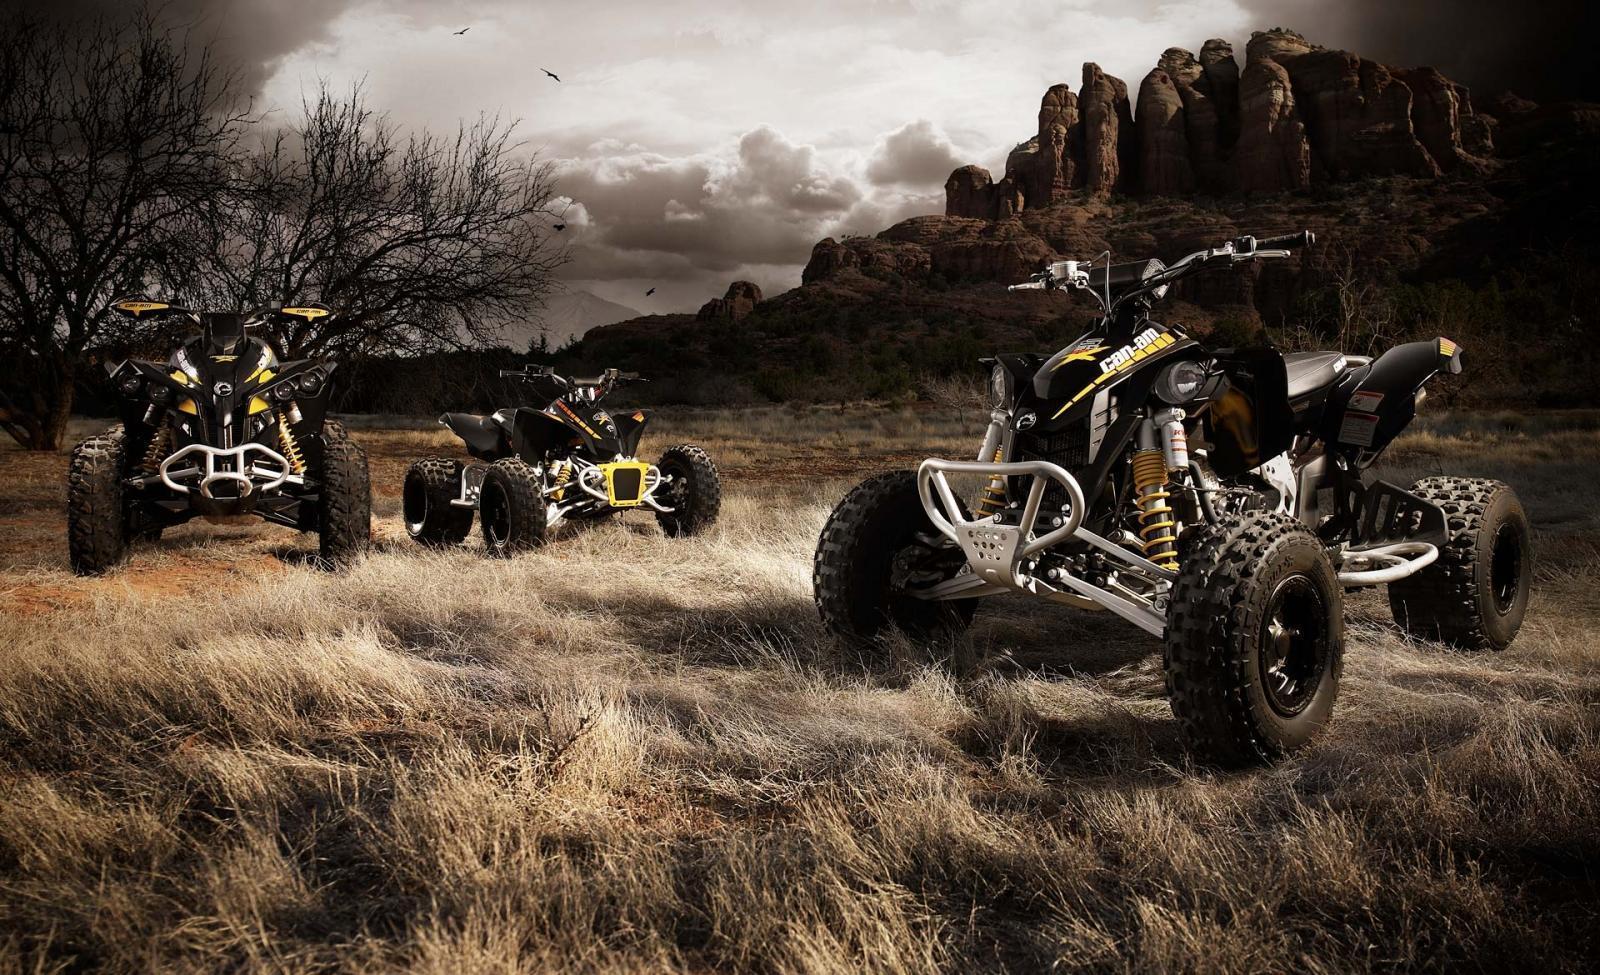 ATV free Wallpaper (13 photo) for your desktop, download picture